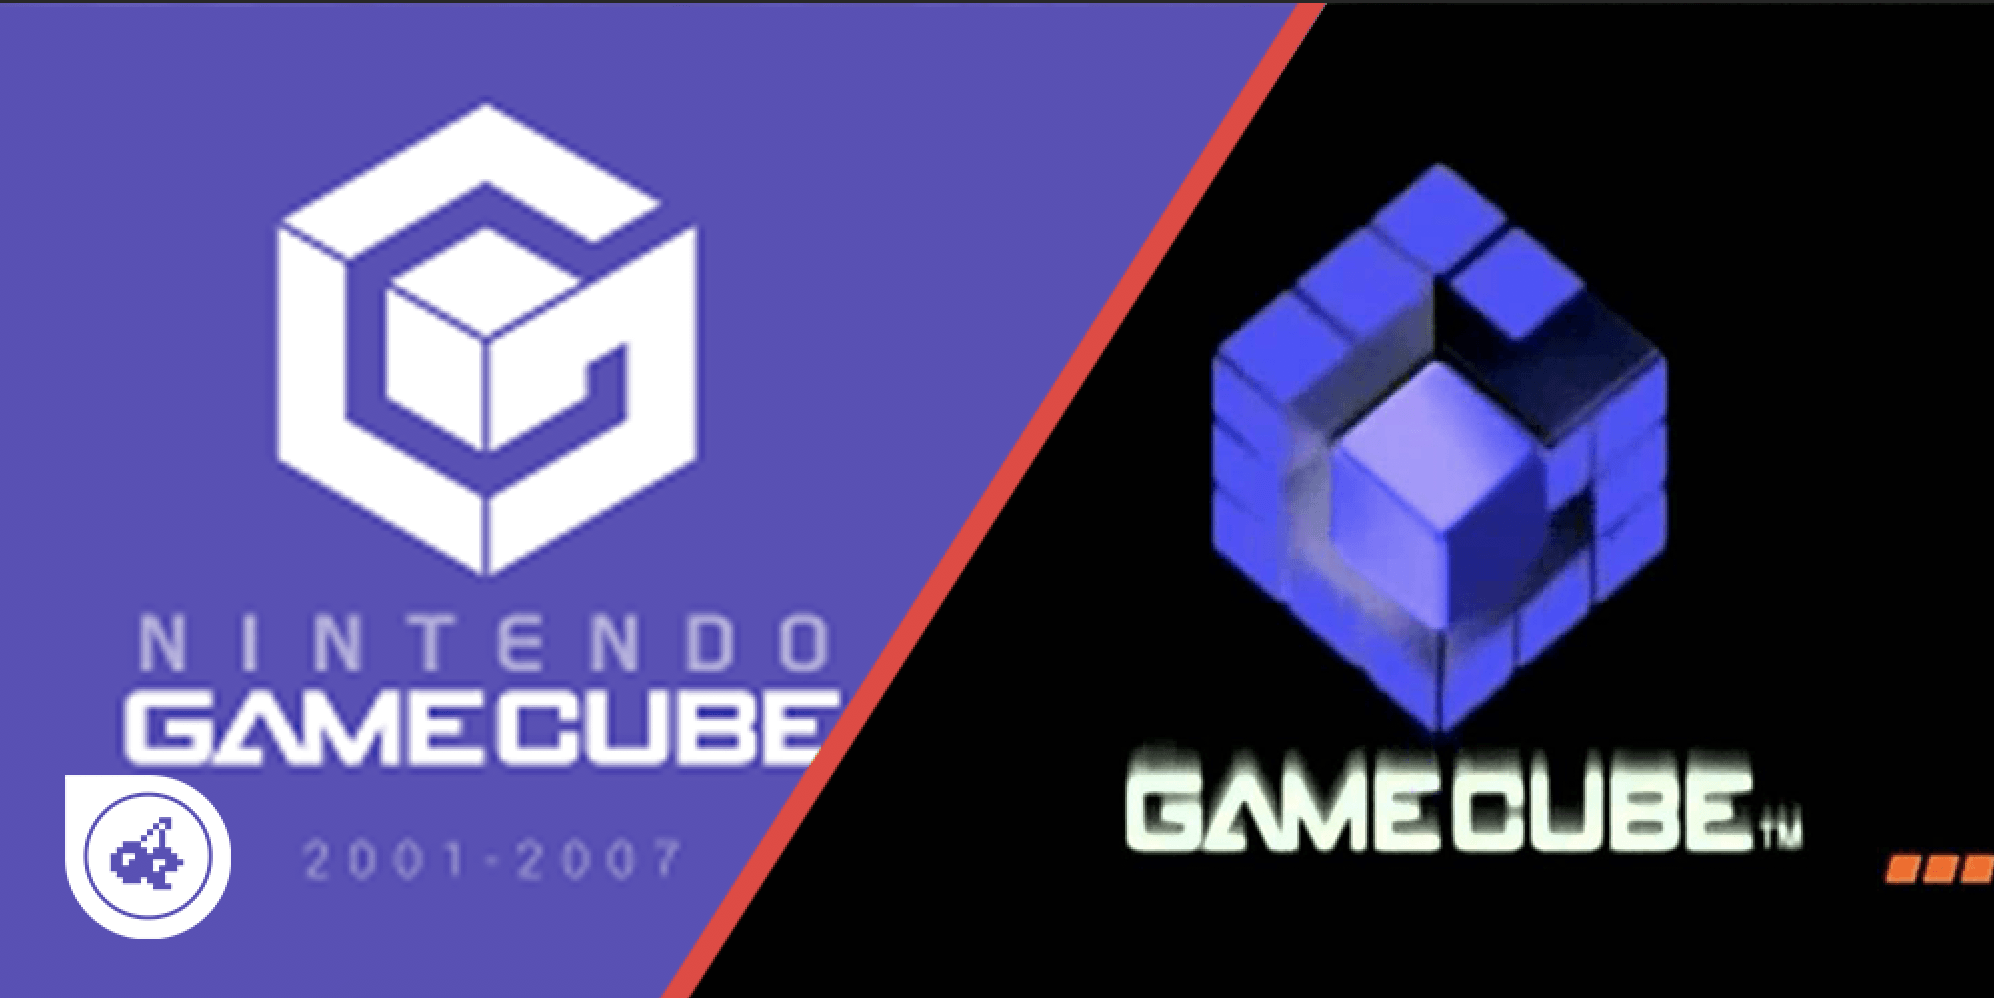 Nintendo GameCube Logo - Gamecube's Logo Has A Secret Message And People Are Only Just Noticing